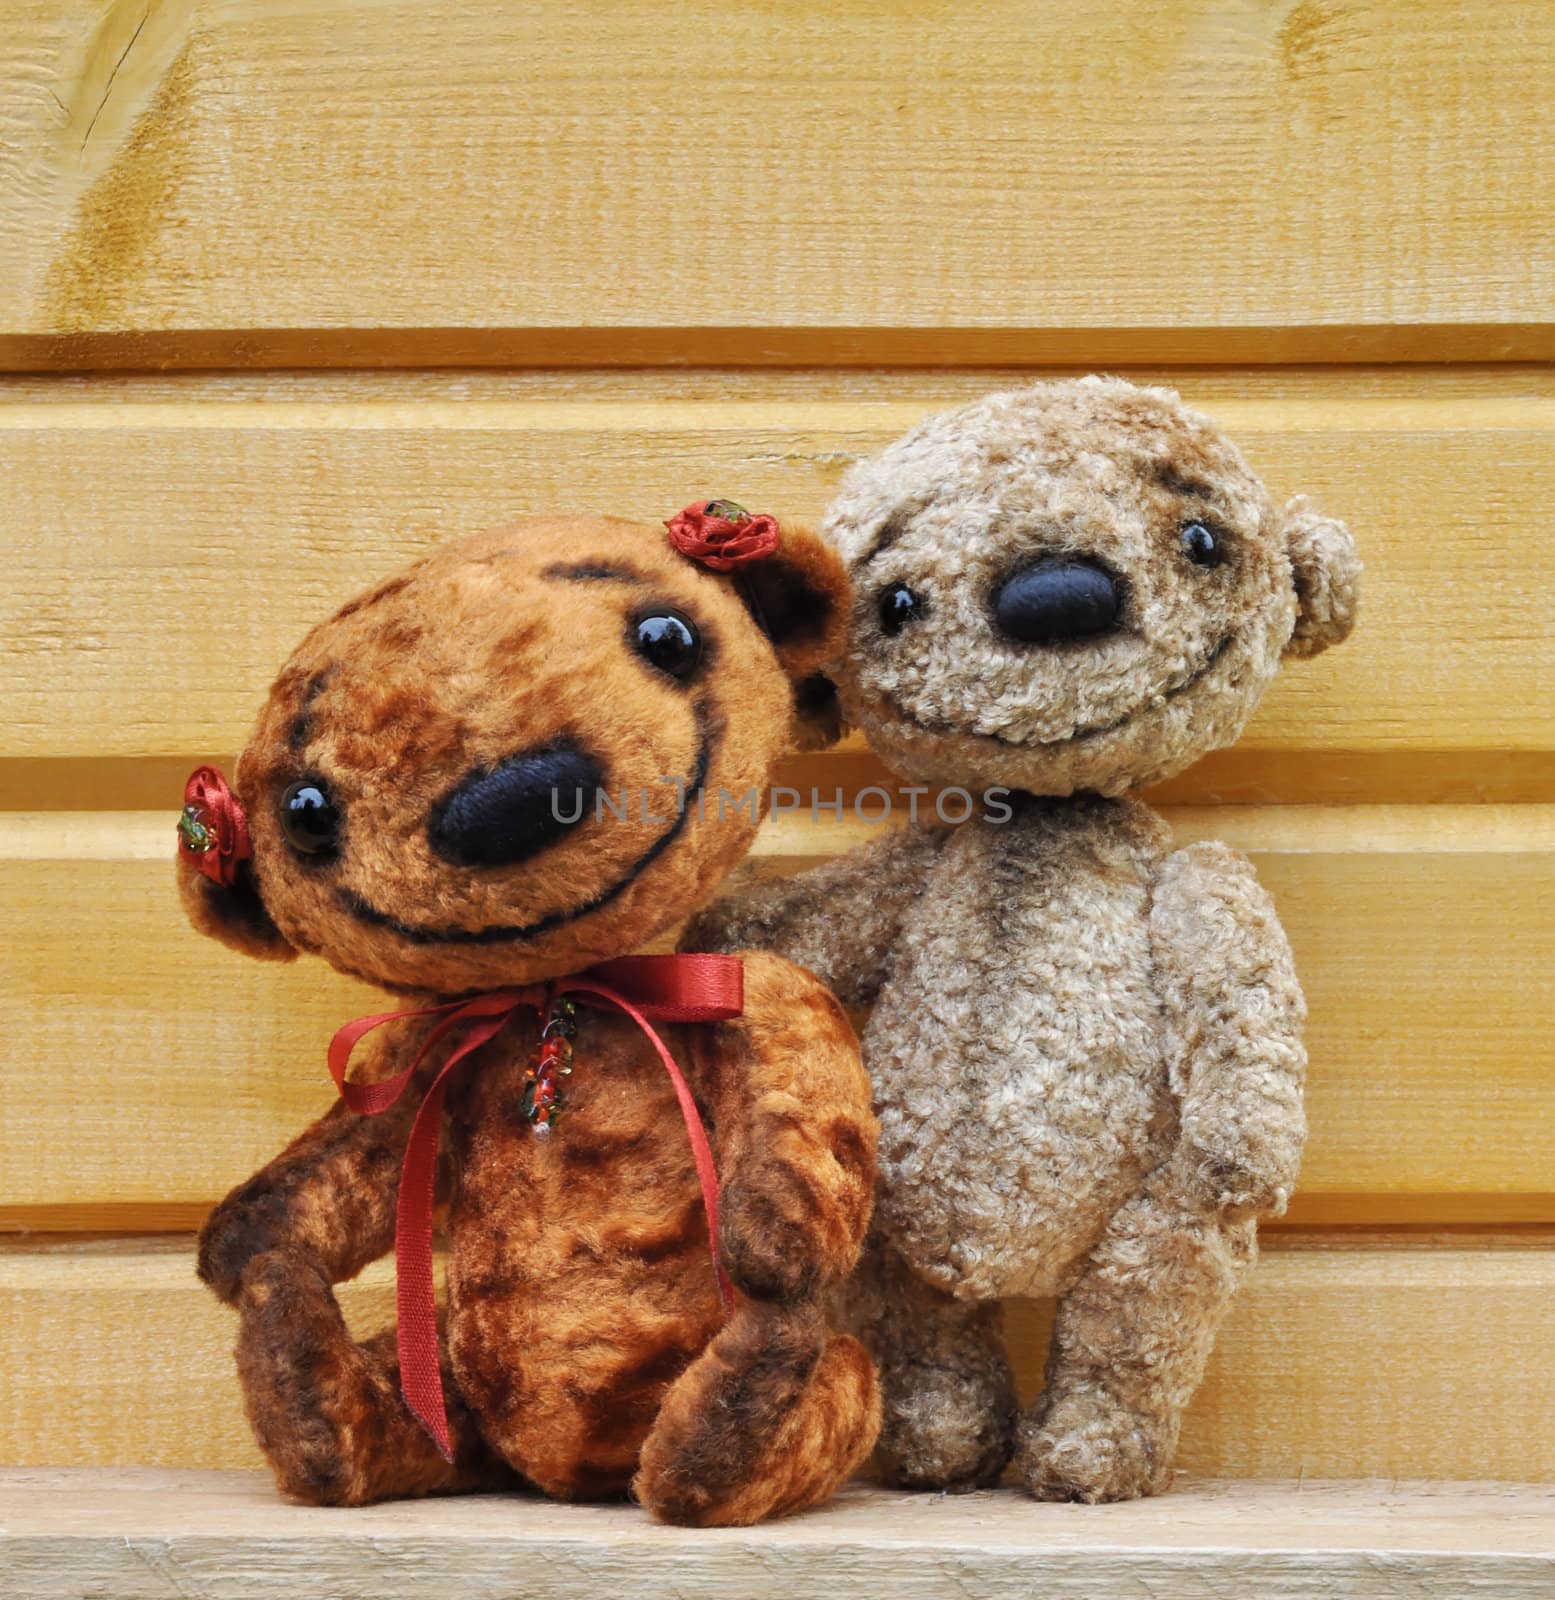 Teddy bears against a wooden wall by alexcoolok